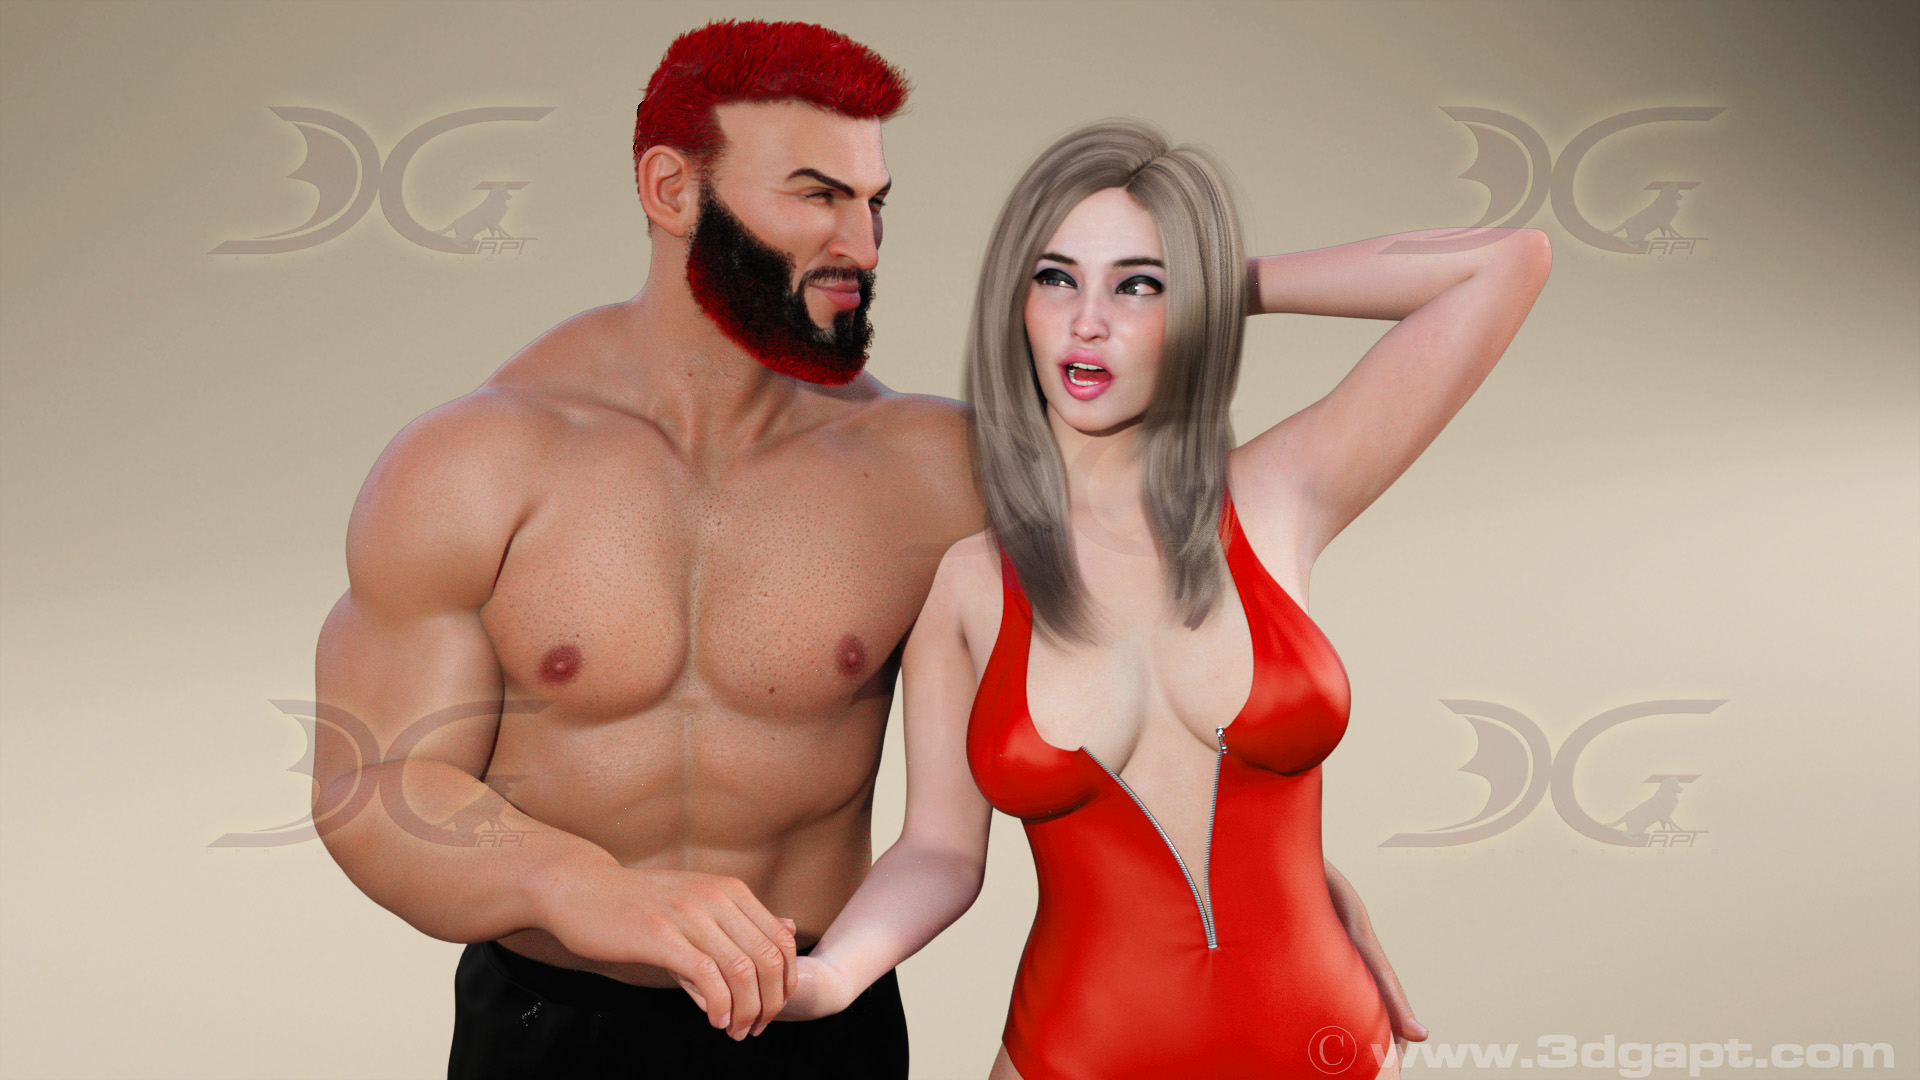 3D characters - Woman and man for book covers